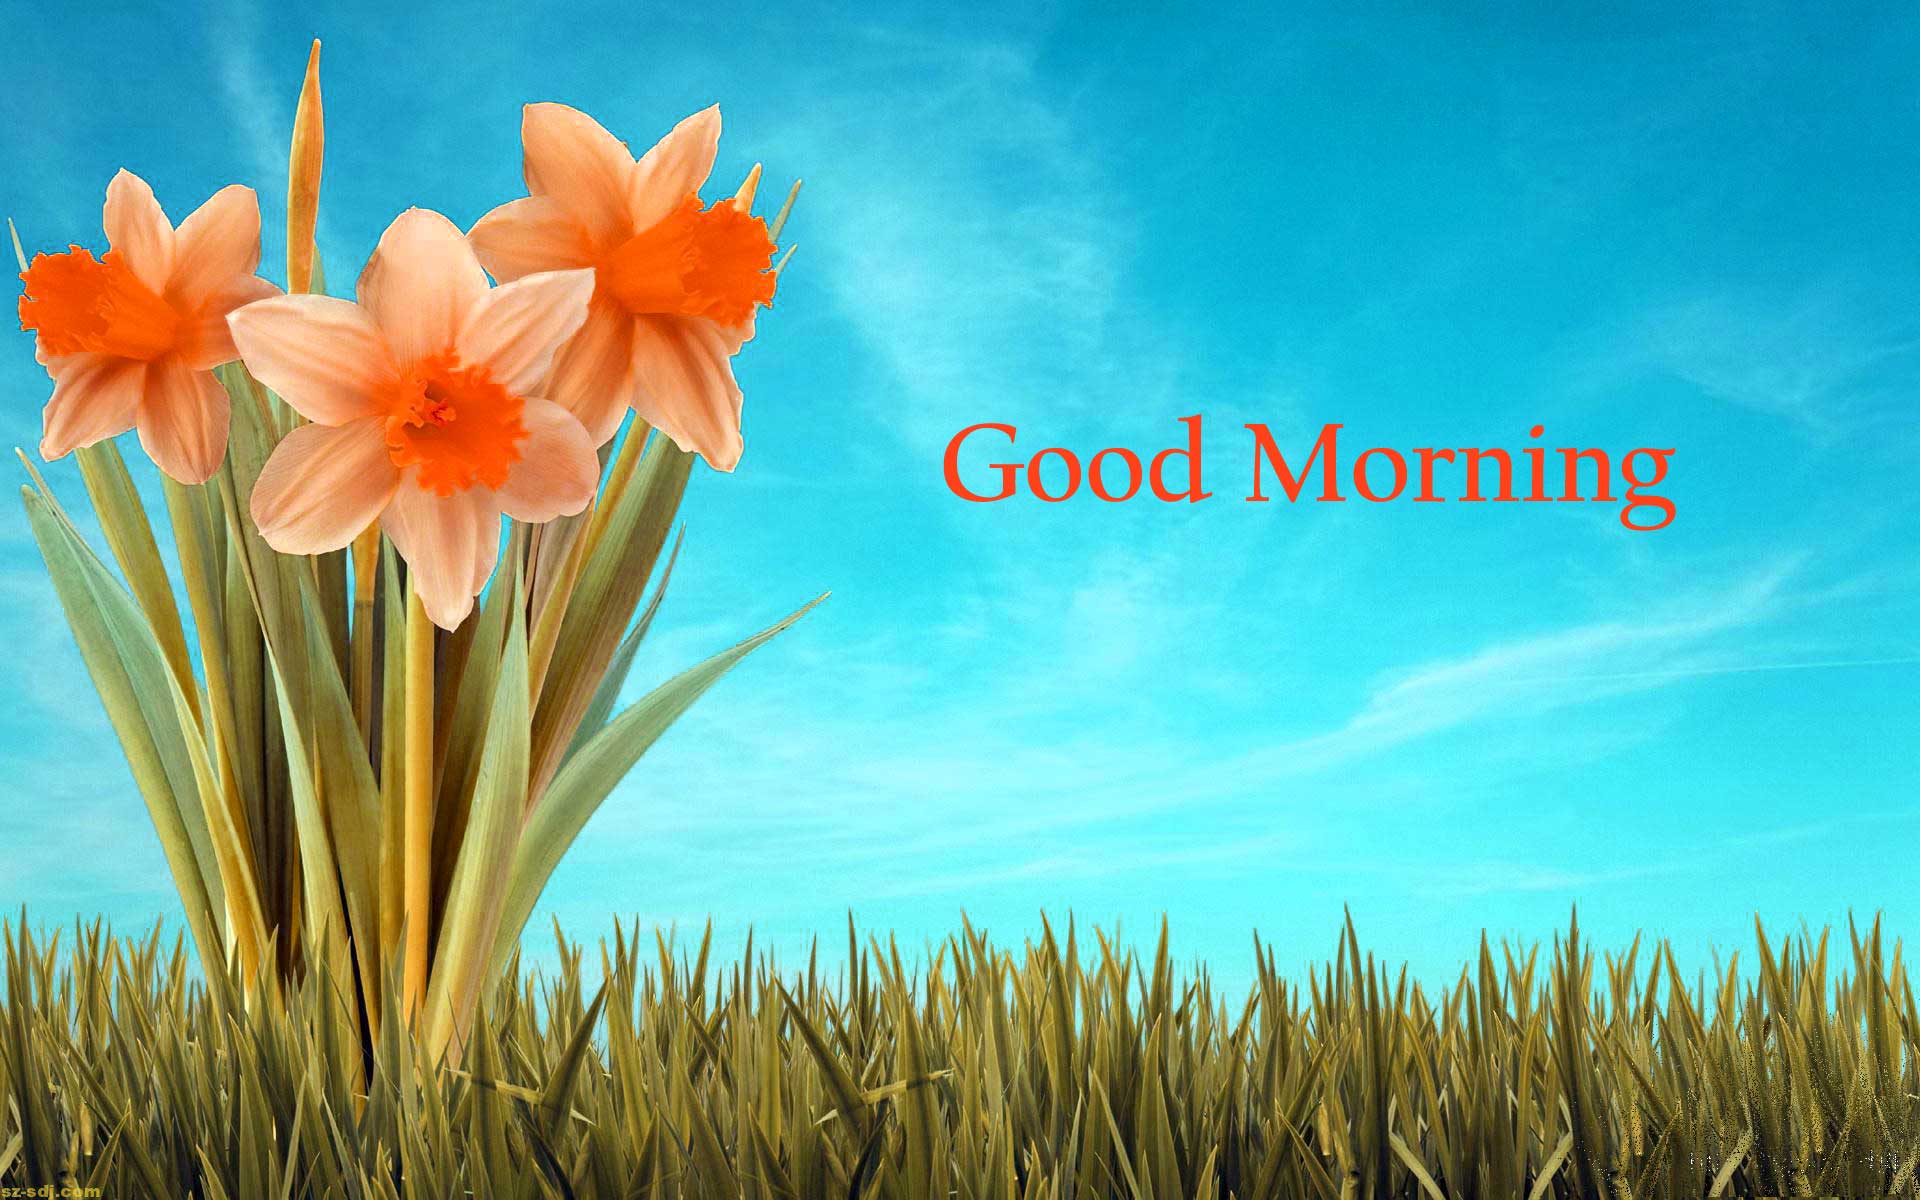 Good Morning Flowers Image Photo Pics HD Download Here